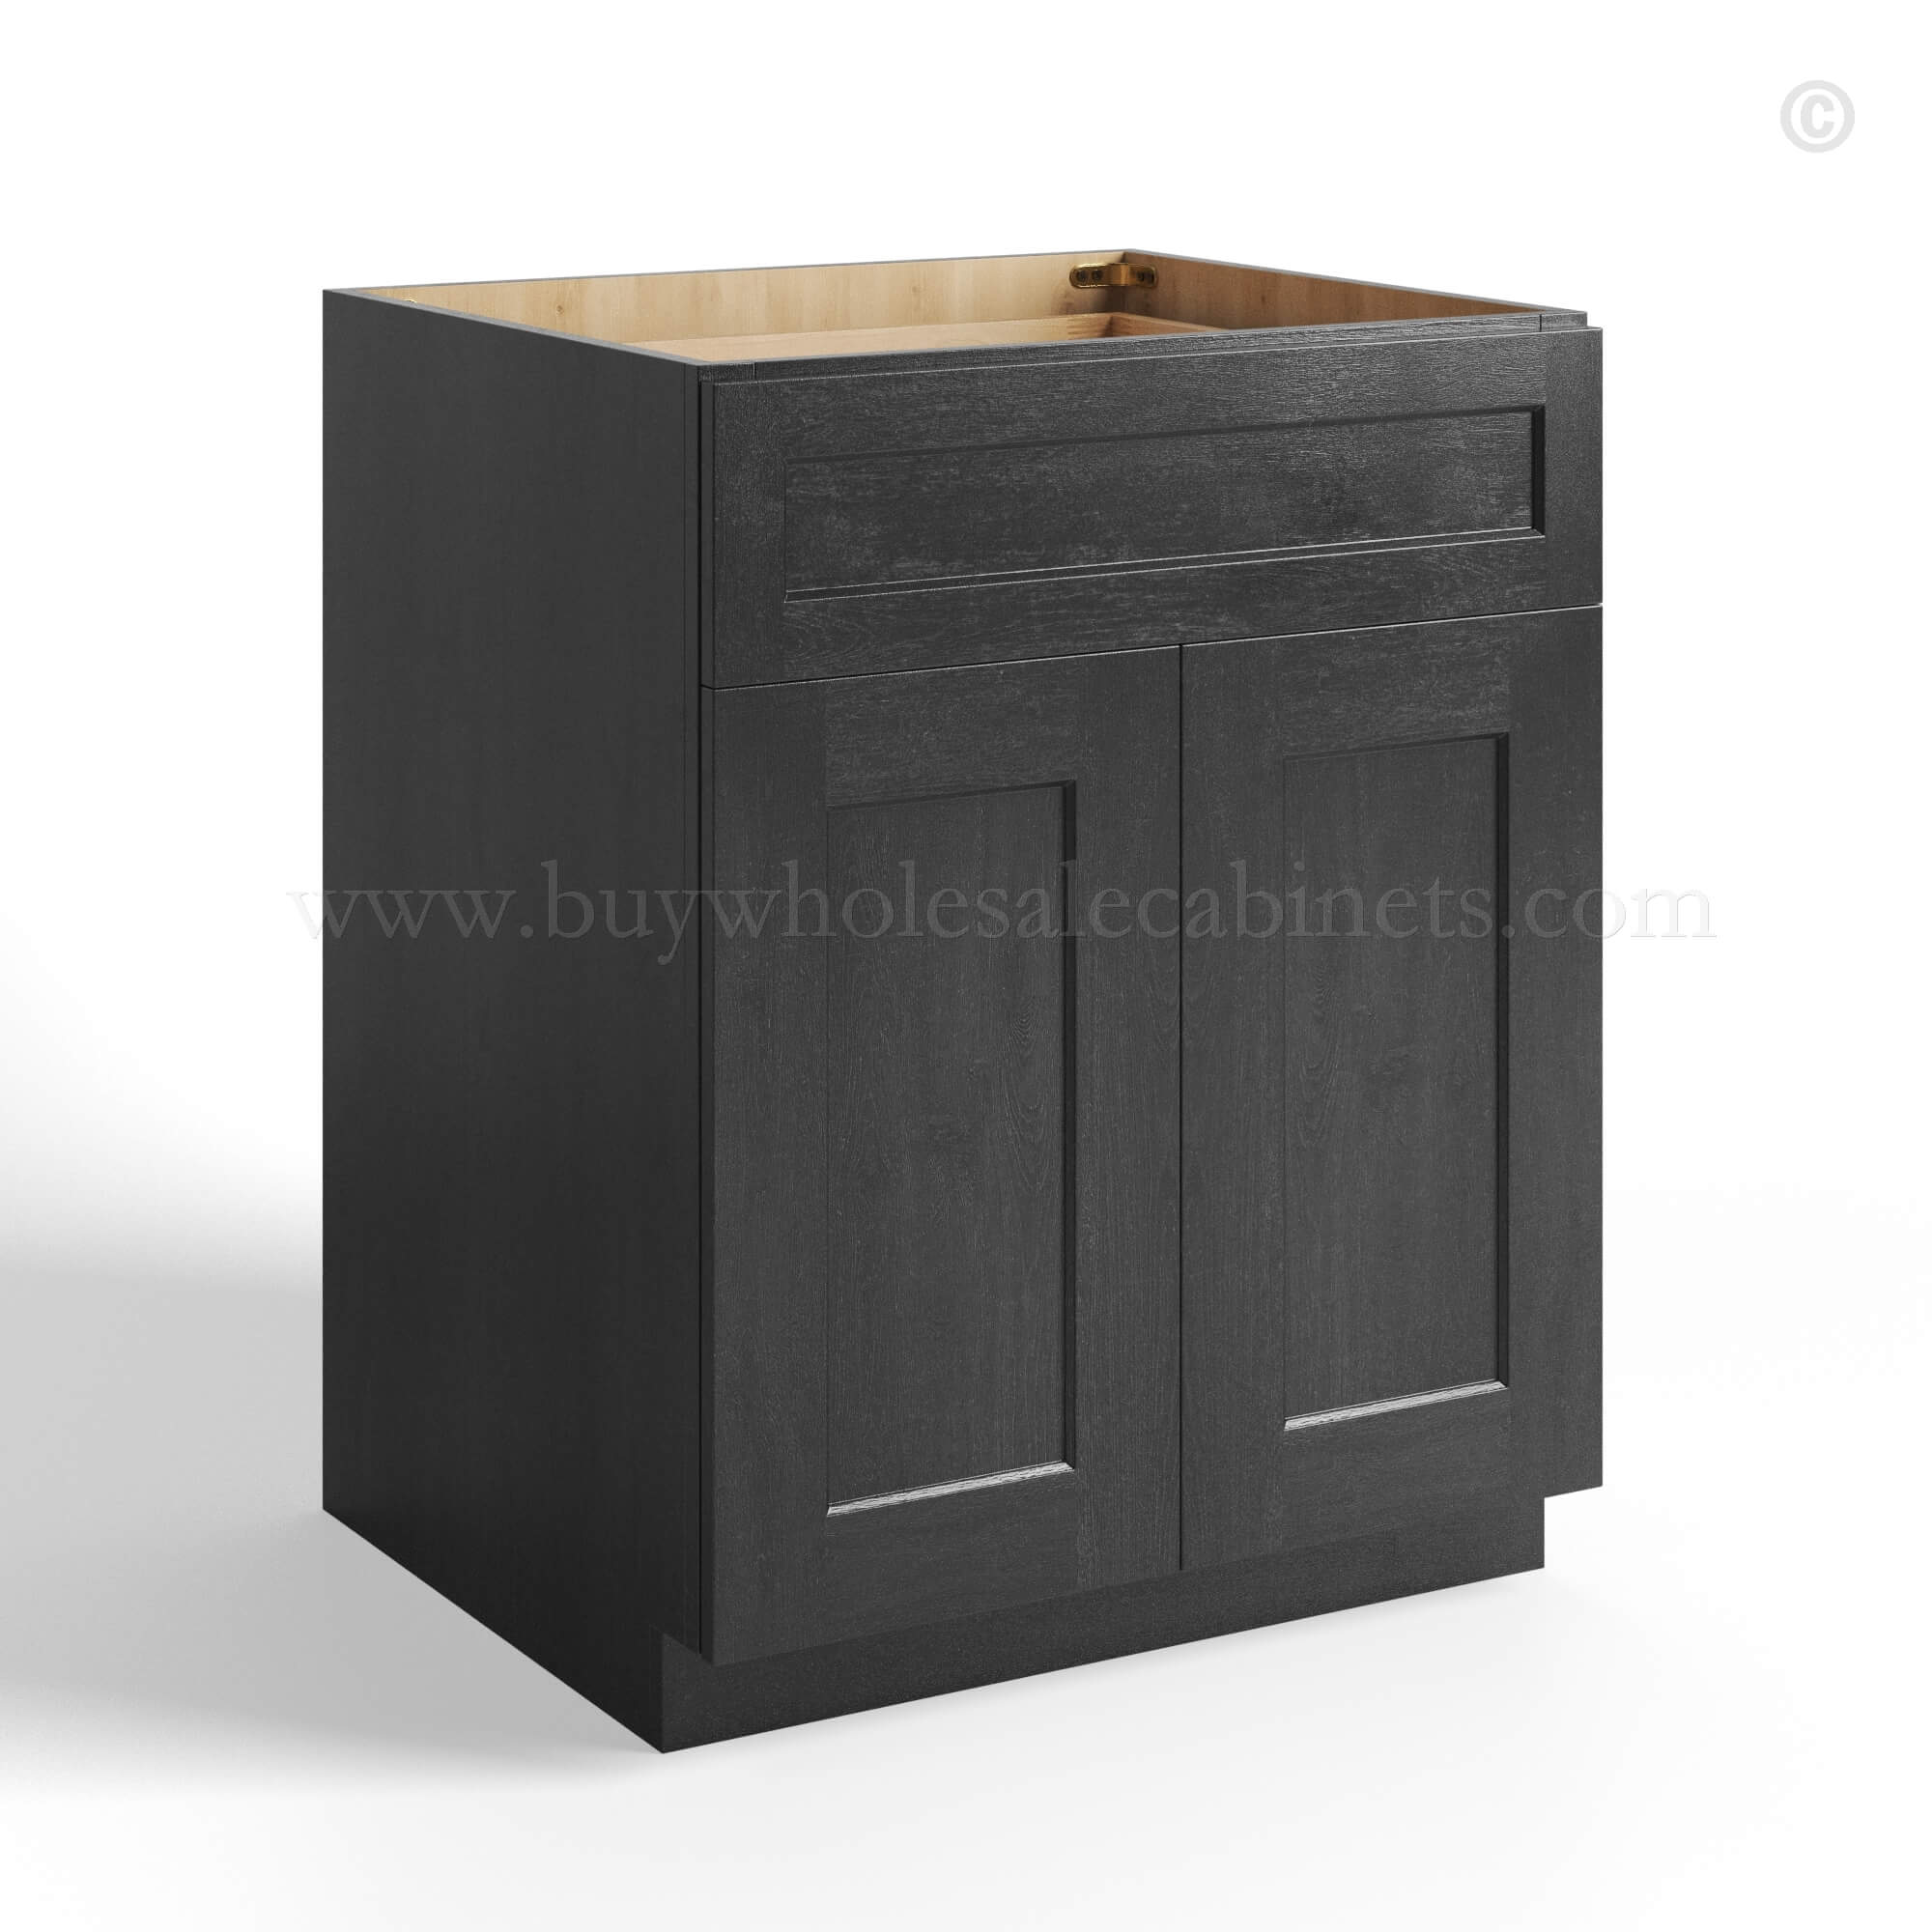 Charcoal Black Shaker Base Cabinet Double Door & Single Drawer, rta cabinets, wholesale cabinets